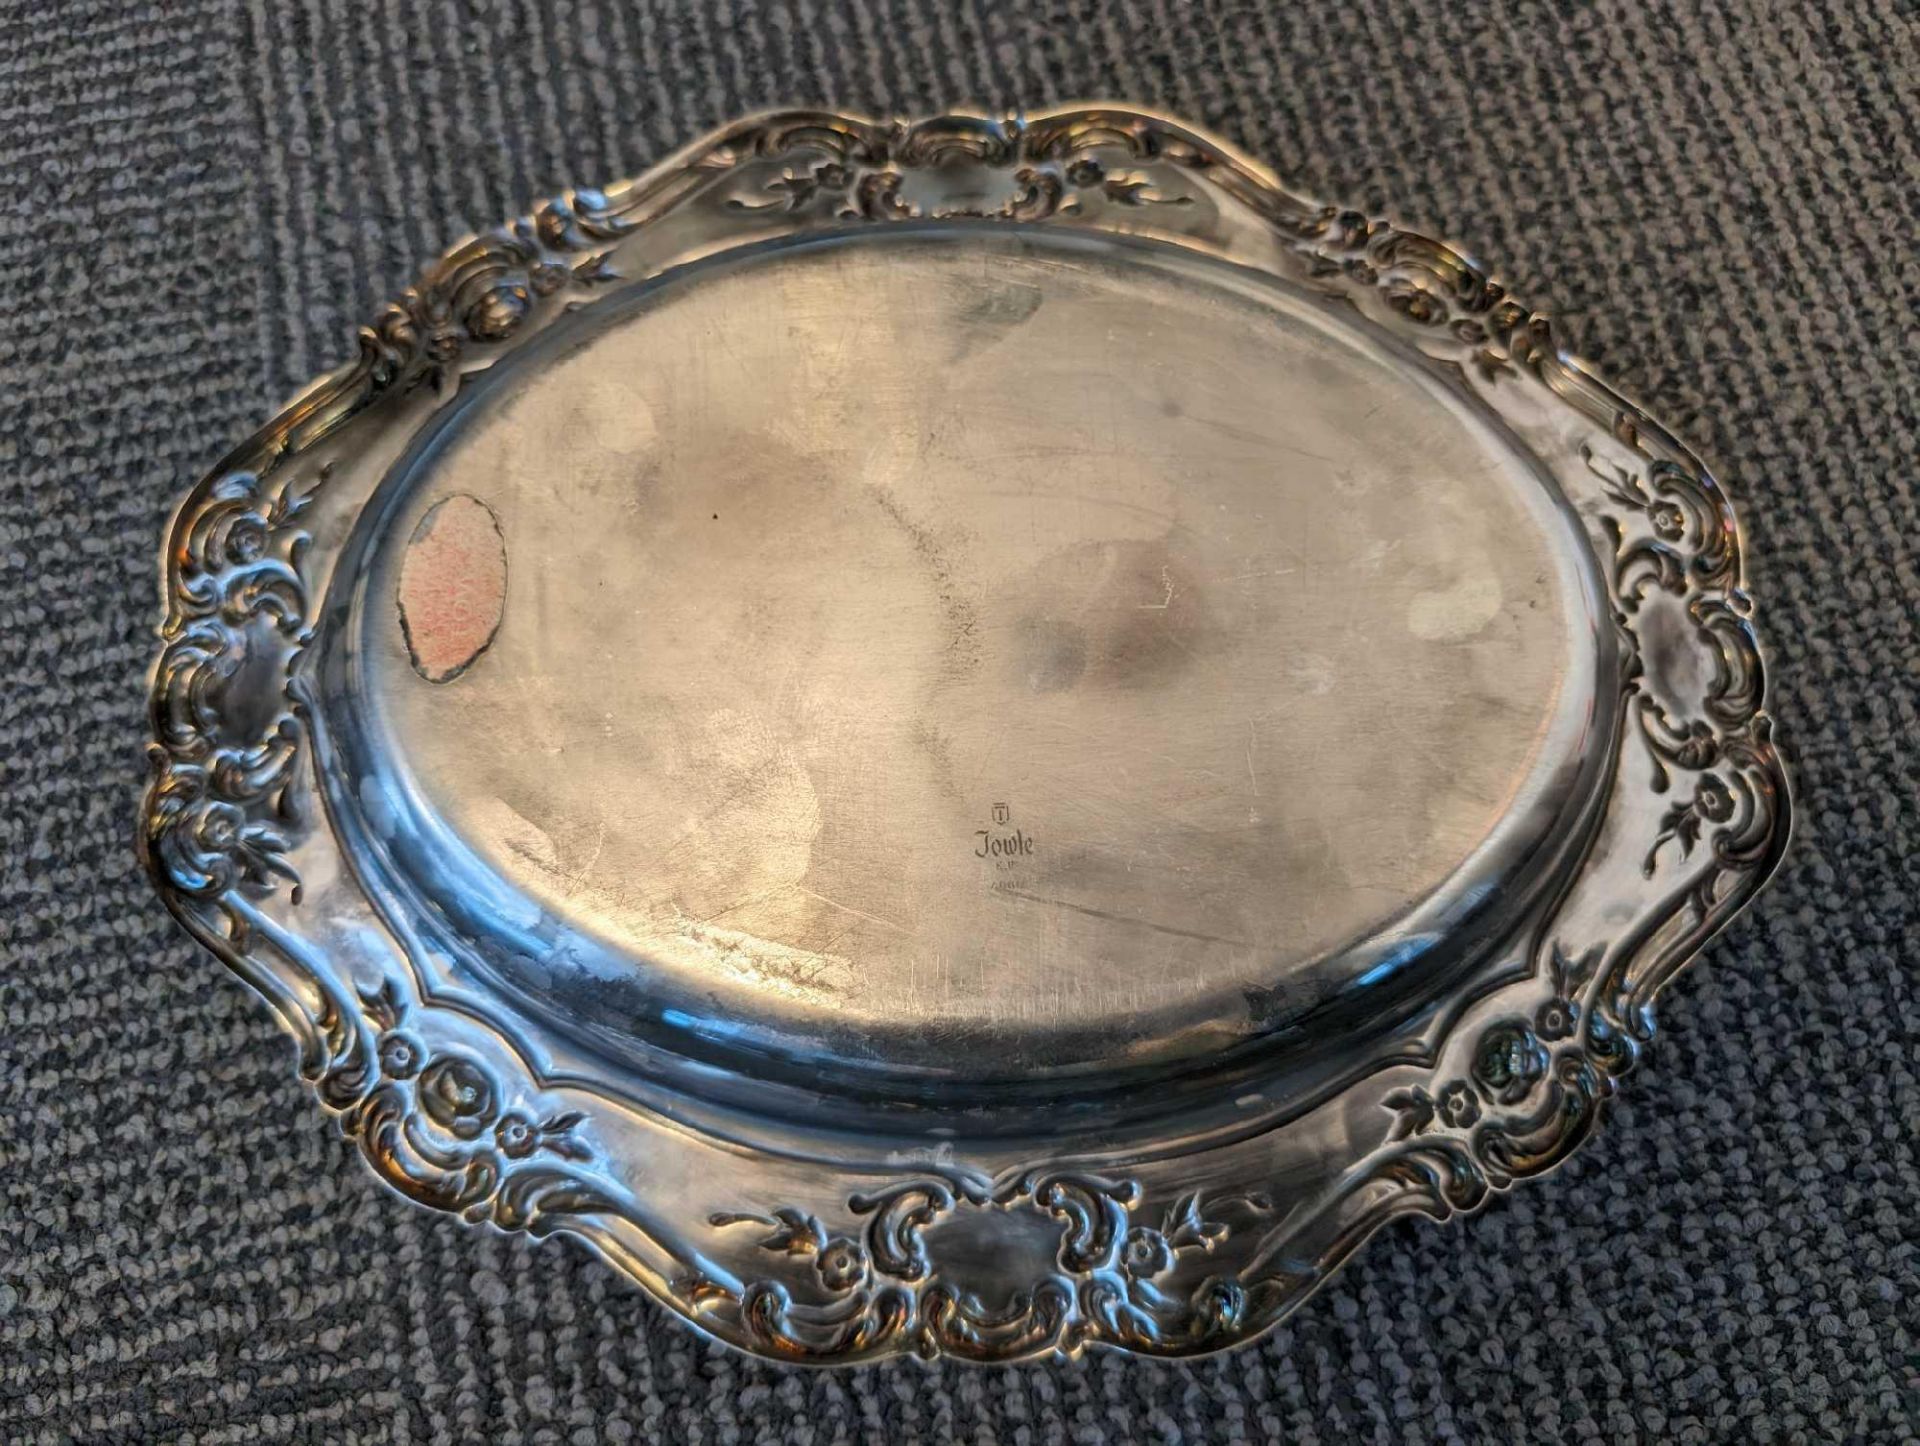 Antique Towle silver plated Oval Serving Tray w/ Glass Relish dish insert - Image 6 of 6